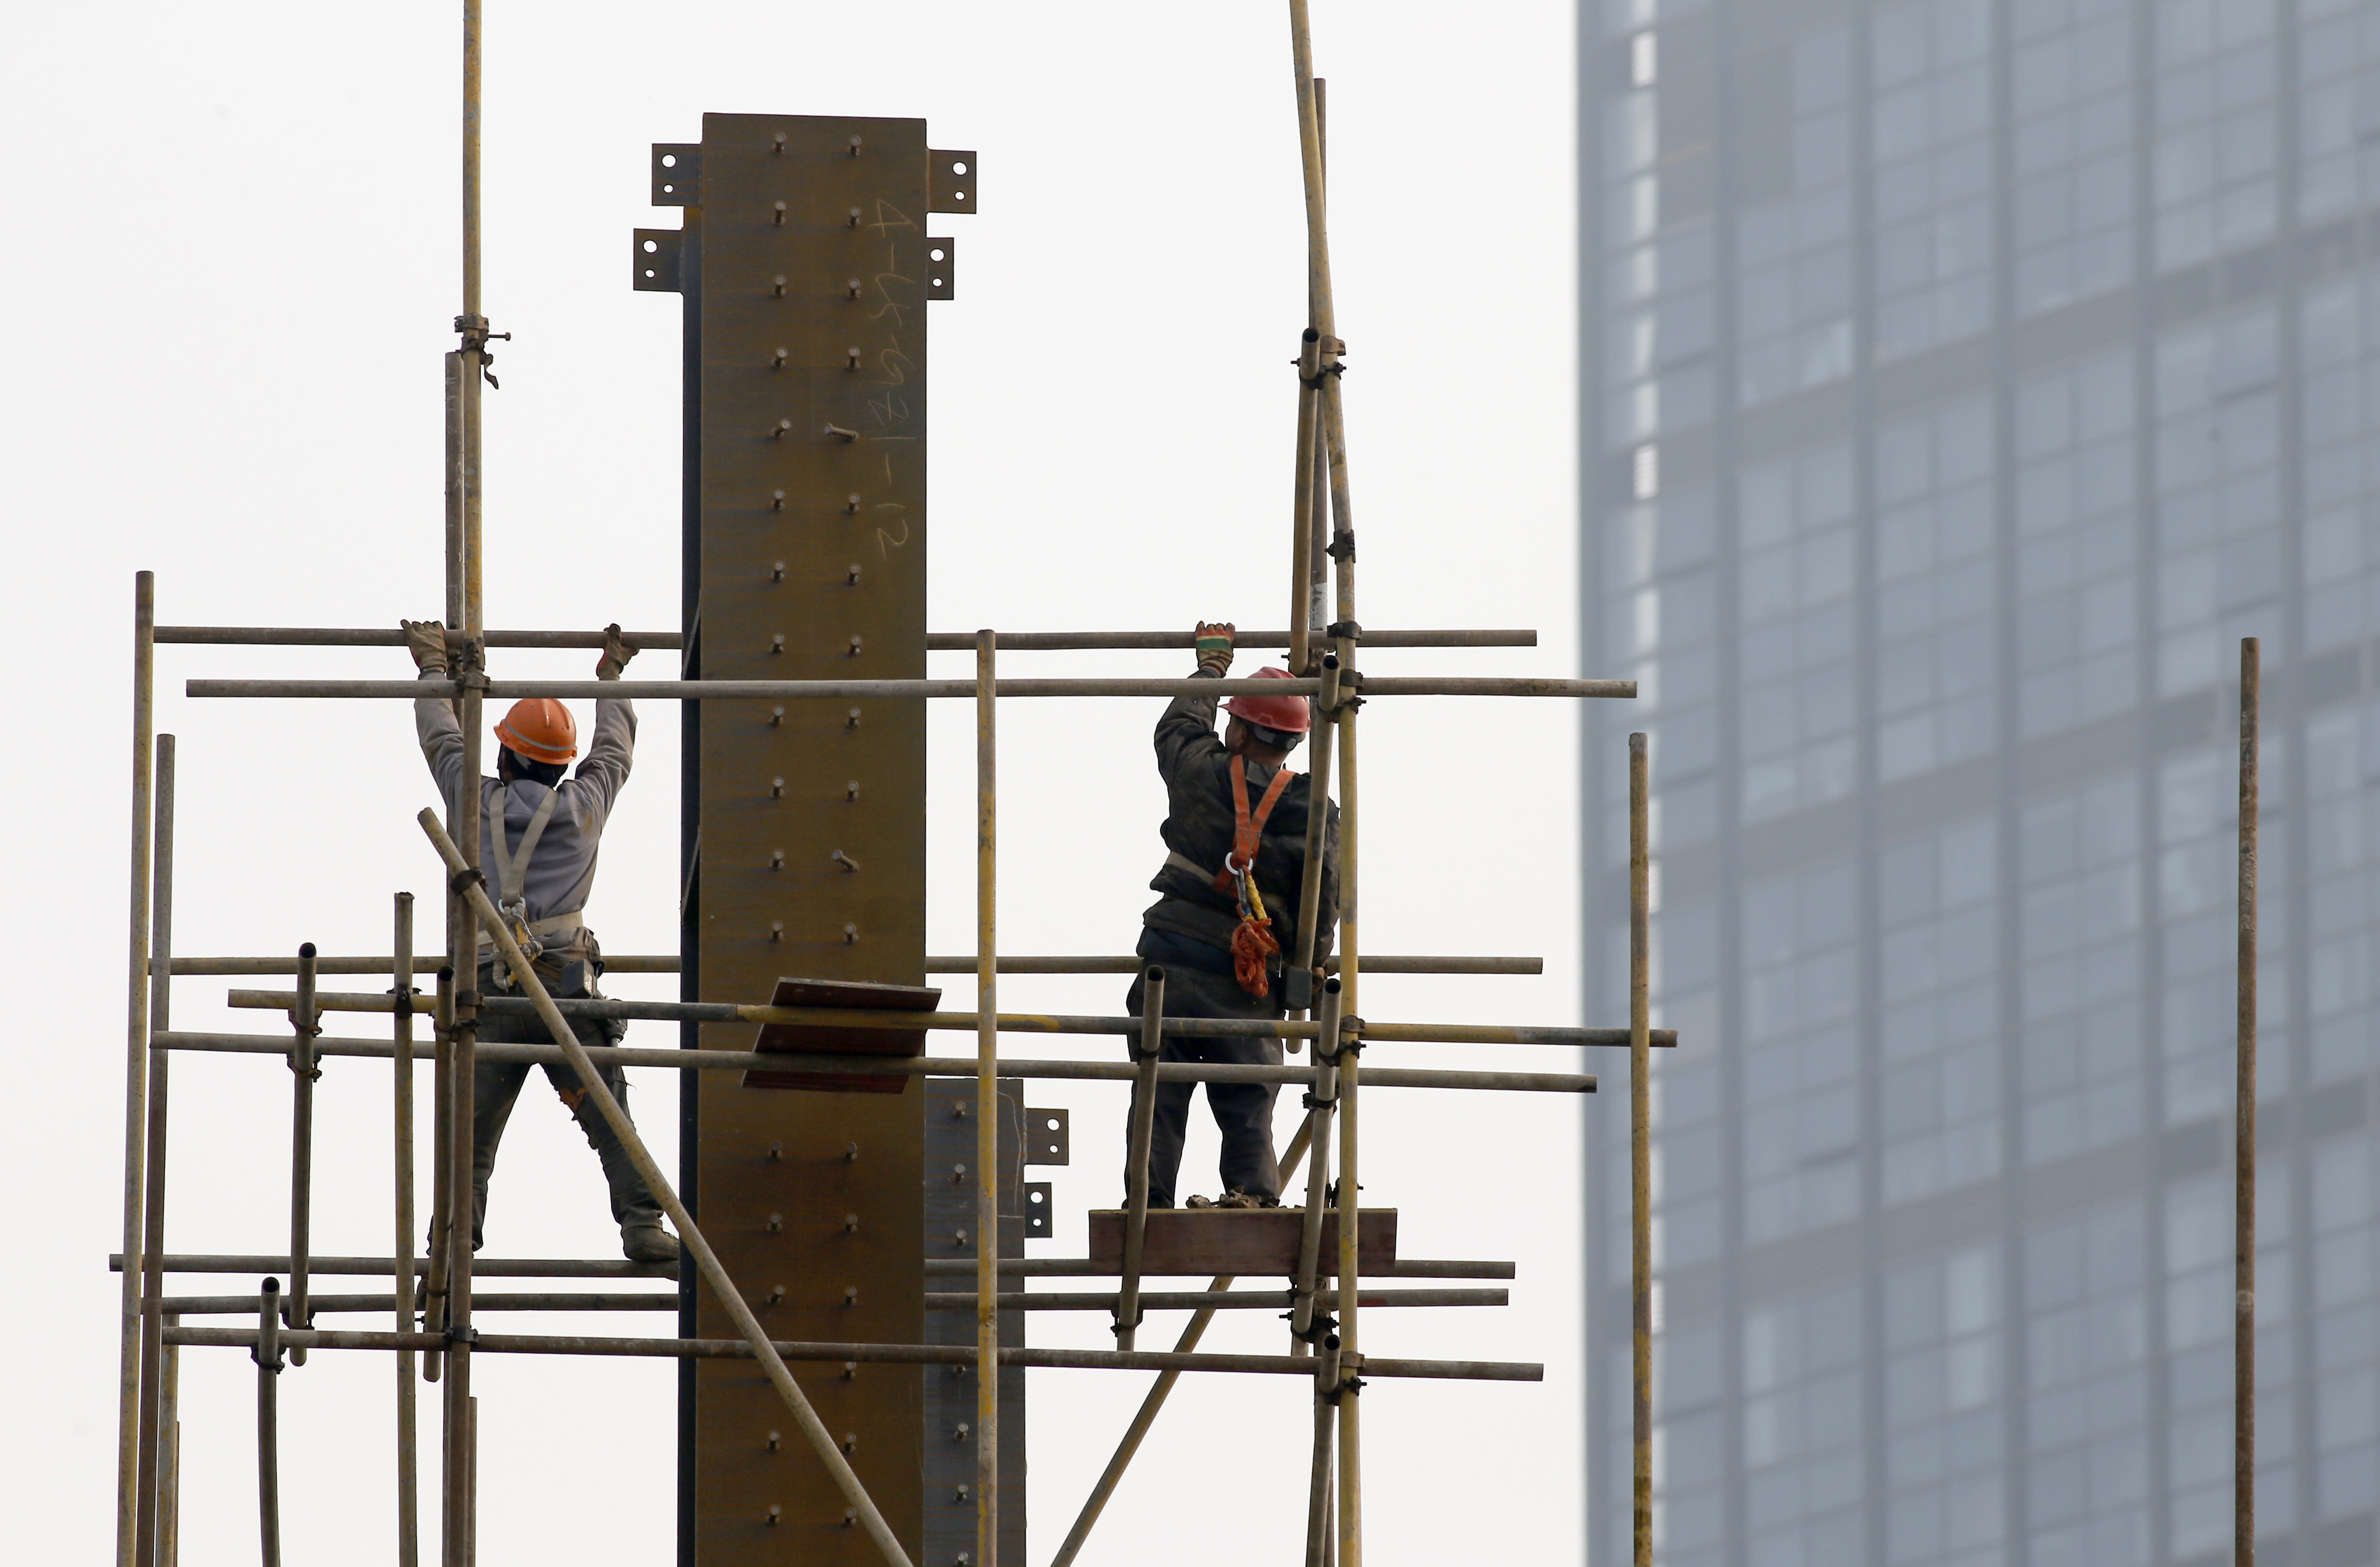 China’s real estate developers have more than just large bond payments on the way